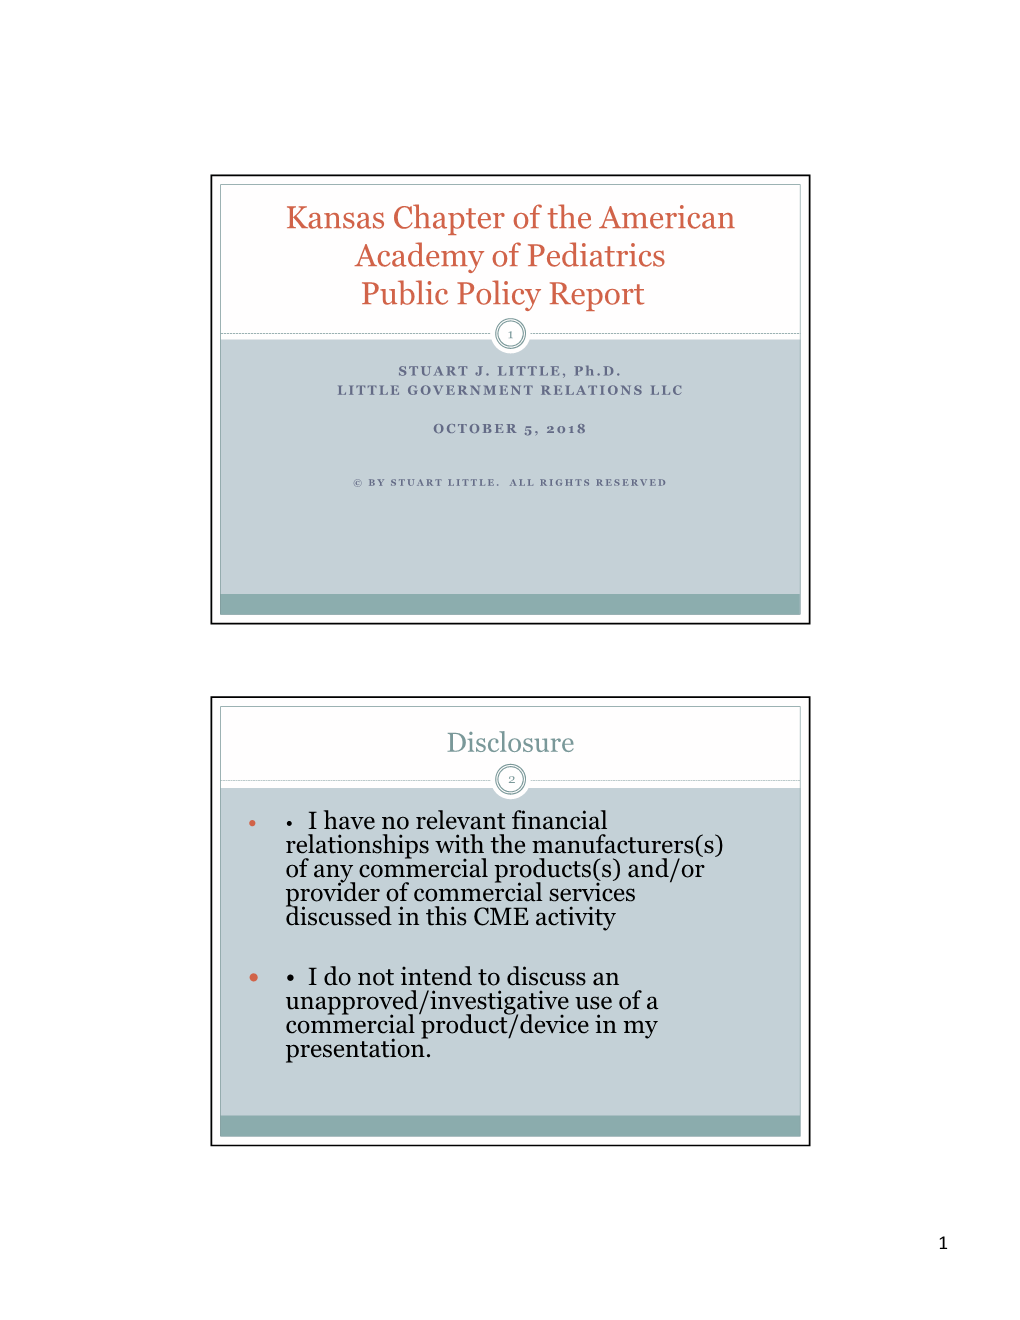 Kansas Chapter of the American Academy of Pediatrics Public Policy Report